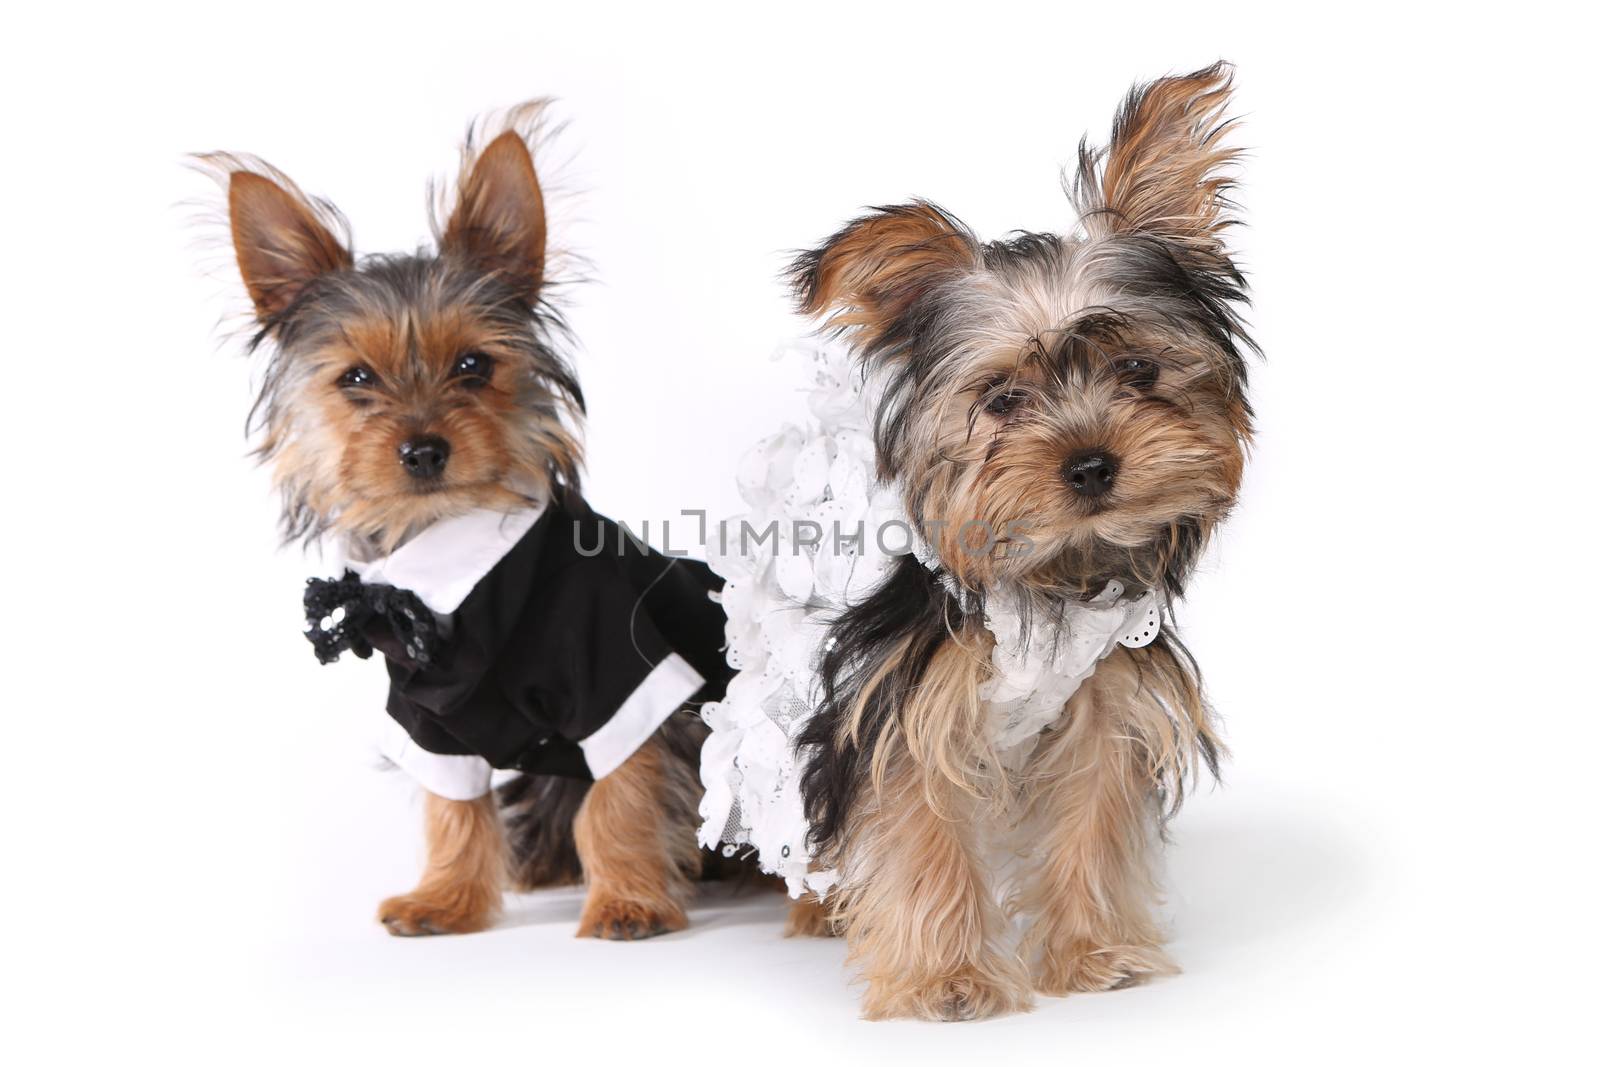 Bridal Couple Yorkshire Terrier Puppies on White Background